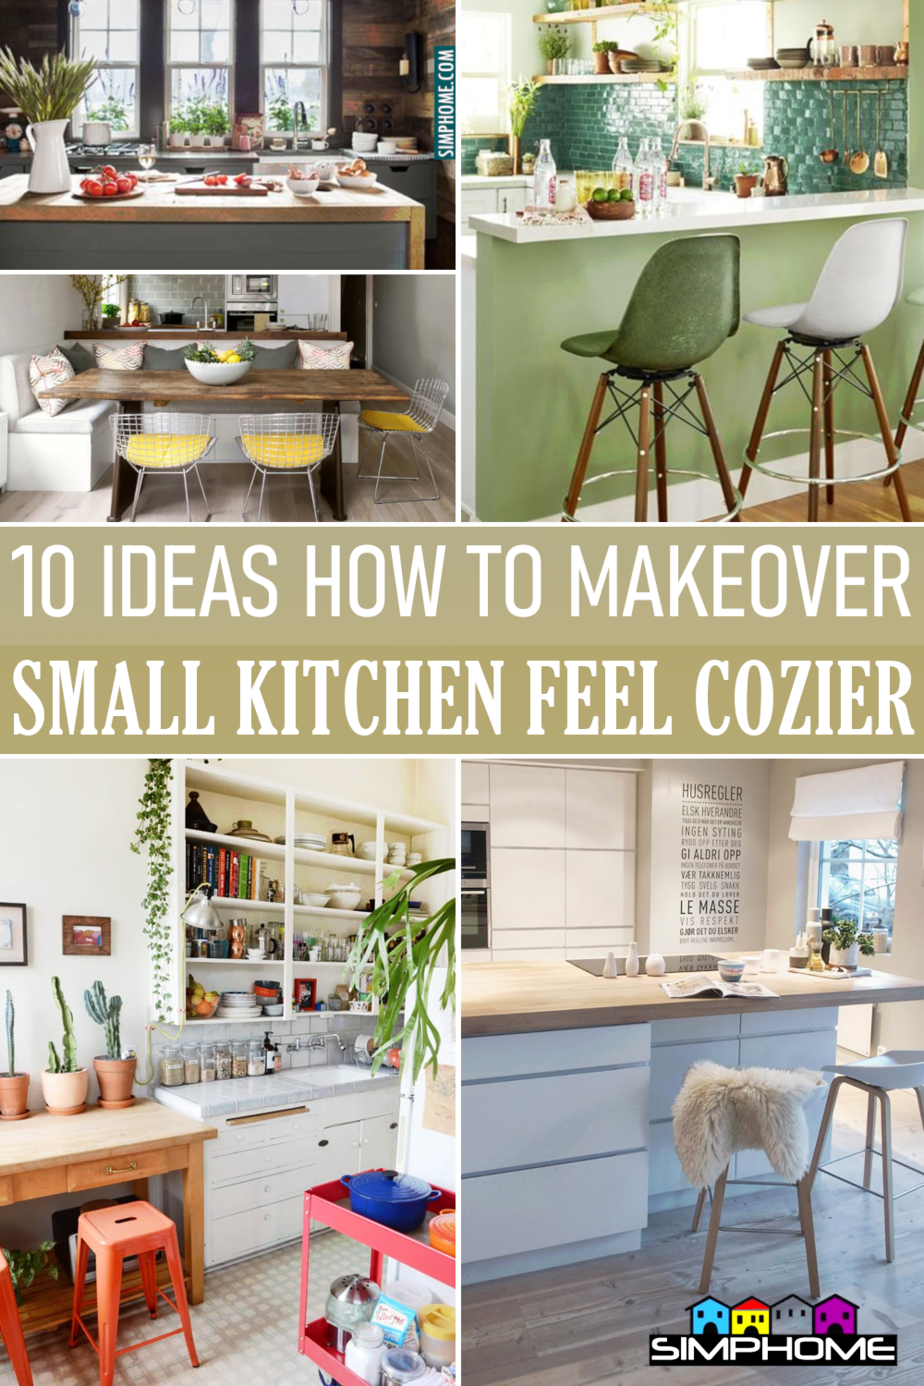 10 Ideas on How to Turn Your Small Kitchen Cozier via Simphome.comFeatured